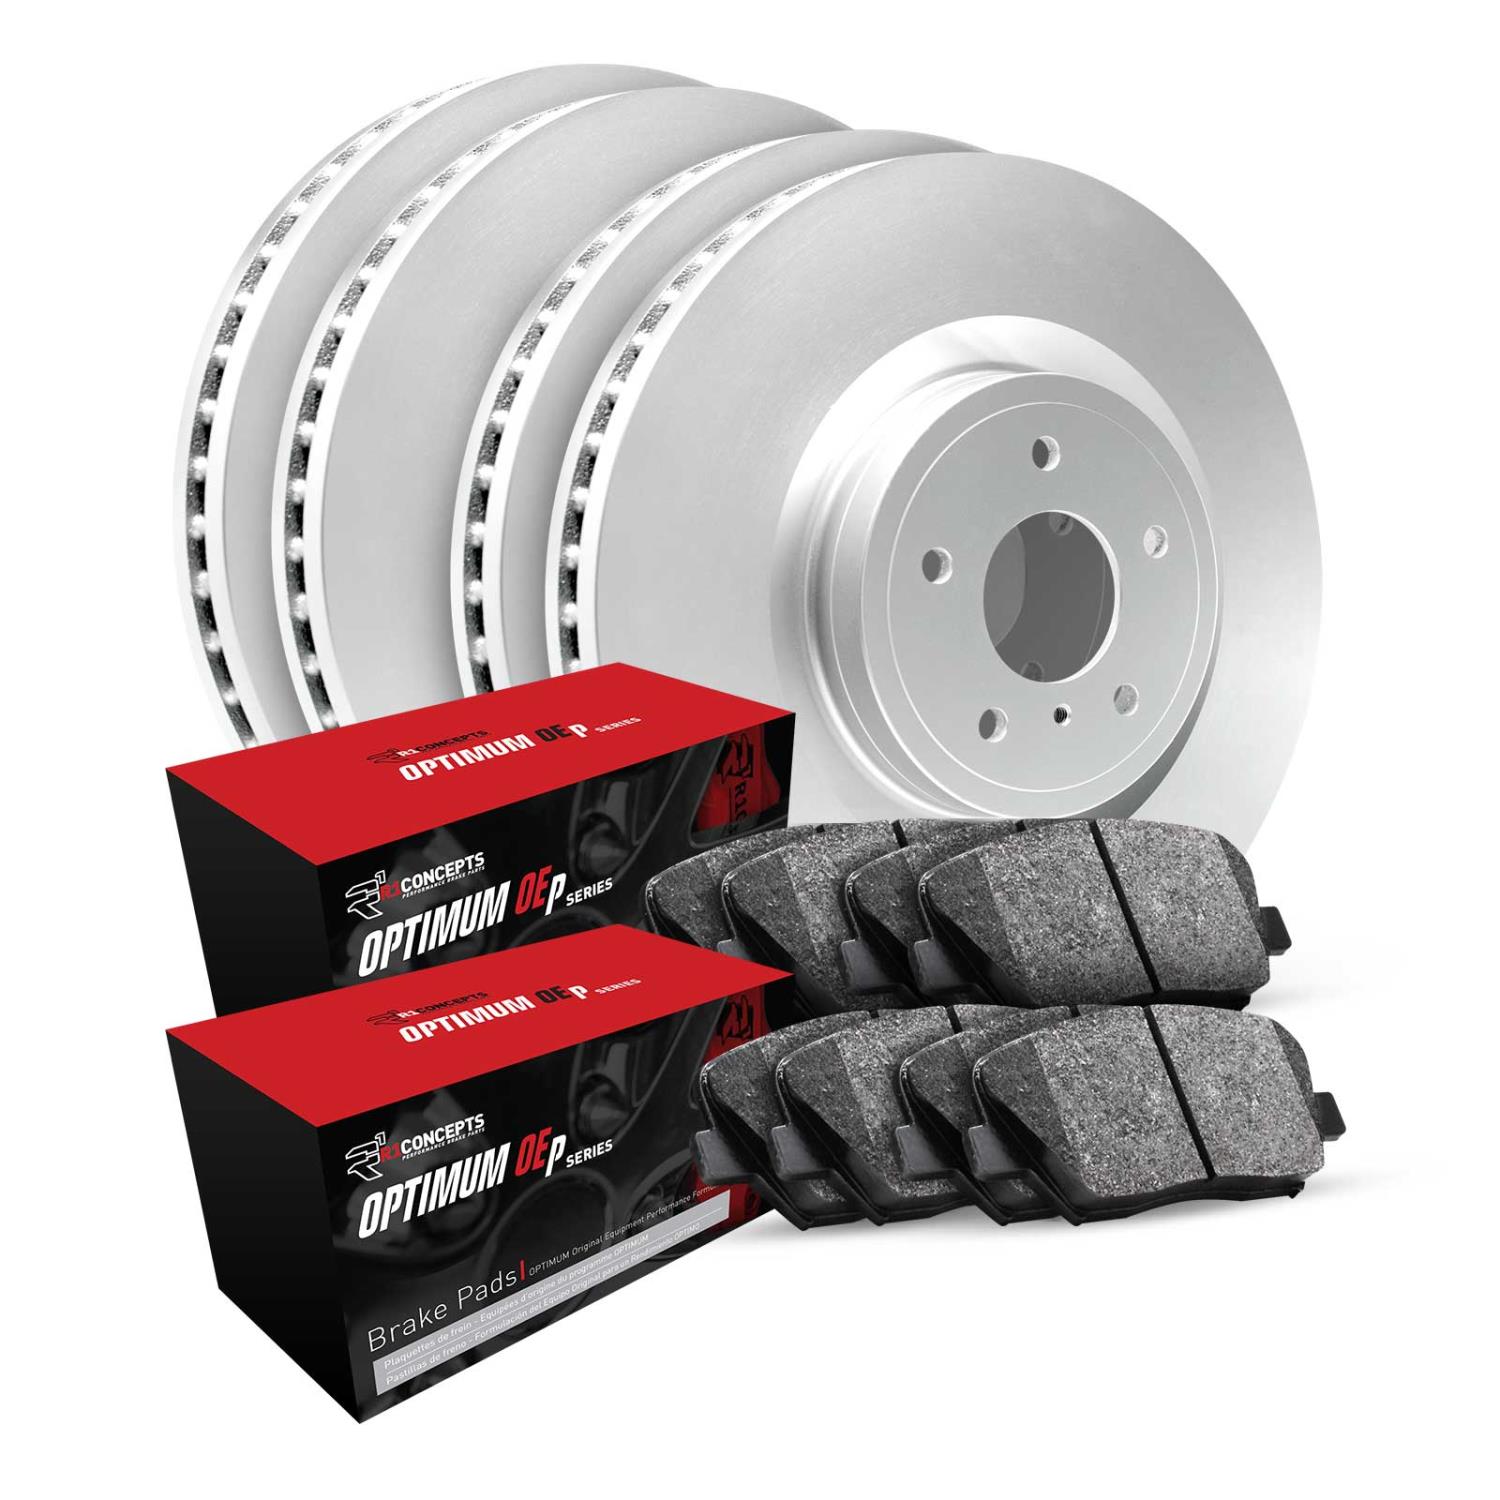 GEO-Carbon Brake Rotor Set w/Optimum OE Pads, 1992-2002 Fits Multiple Makes/Models, Position: Front & Rear